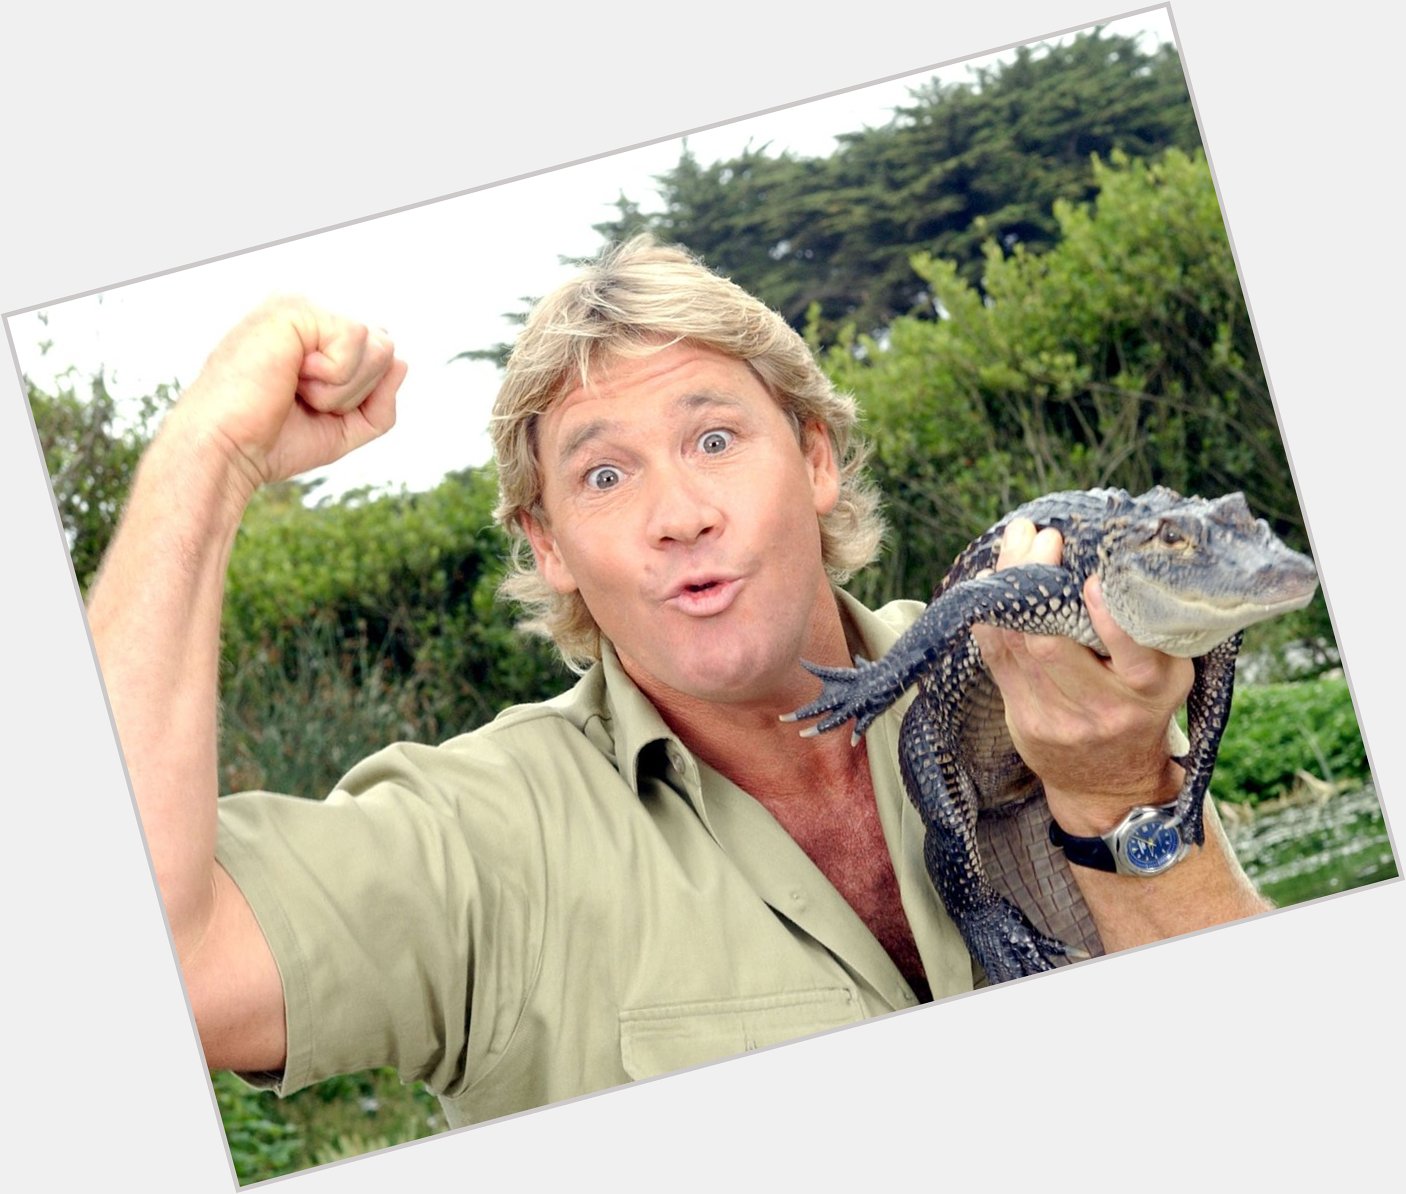 Happy Birthday to \The Crocodile Hunter\ Steve Irwin, who would have turned 56 today! 